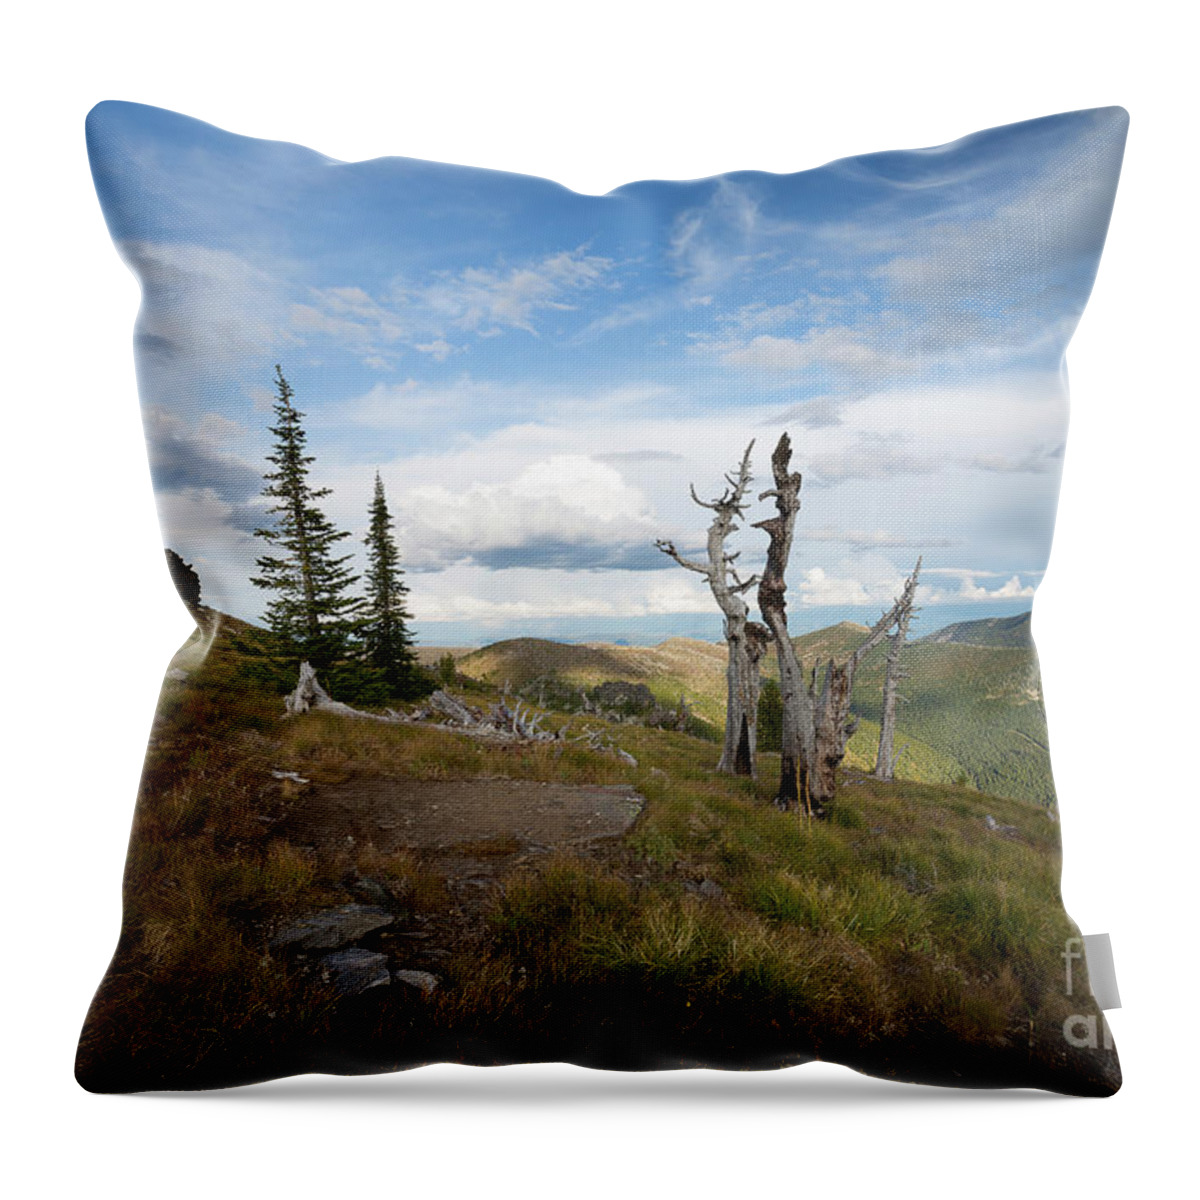 Bonner County Throw Pillow featuring the photograph Sundance Lookout by Idaho Scenic Images Linda Lantzy